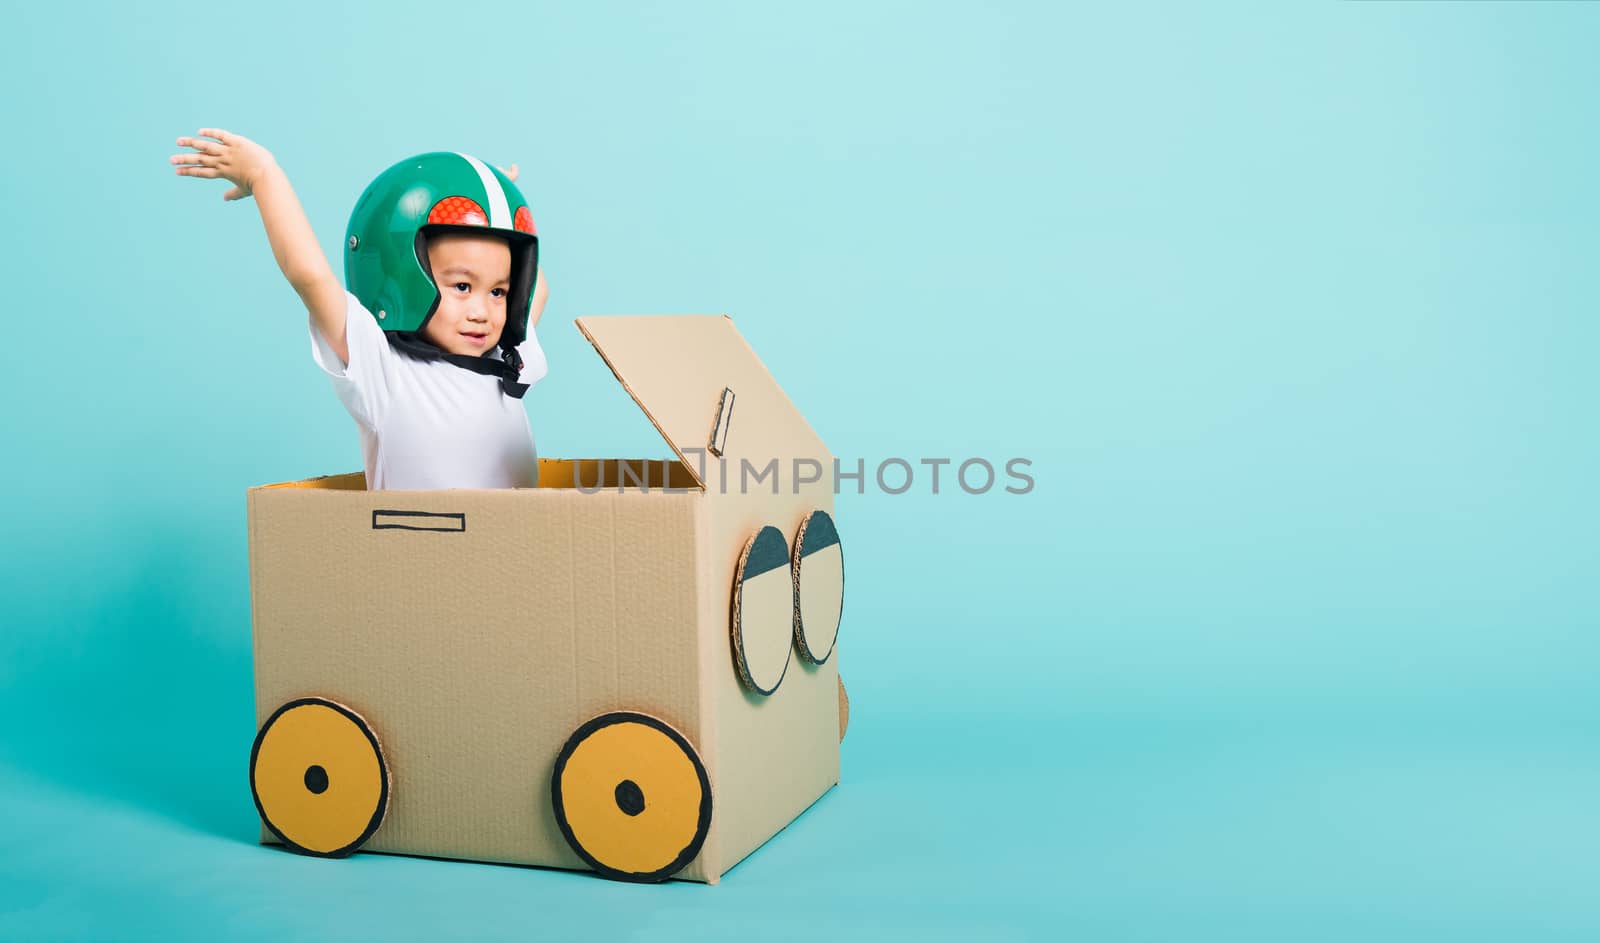 Happy Asian children boy with Helmet smile in driving play car creative by a cardboard box imagination, summer holiday travel concept, studio shot on blue background with copy space for text